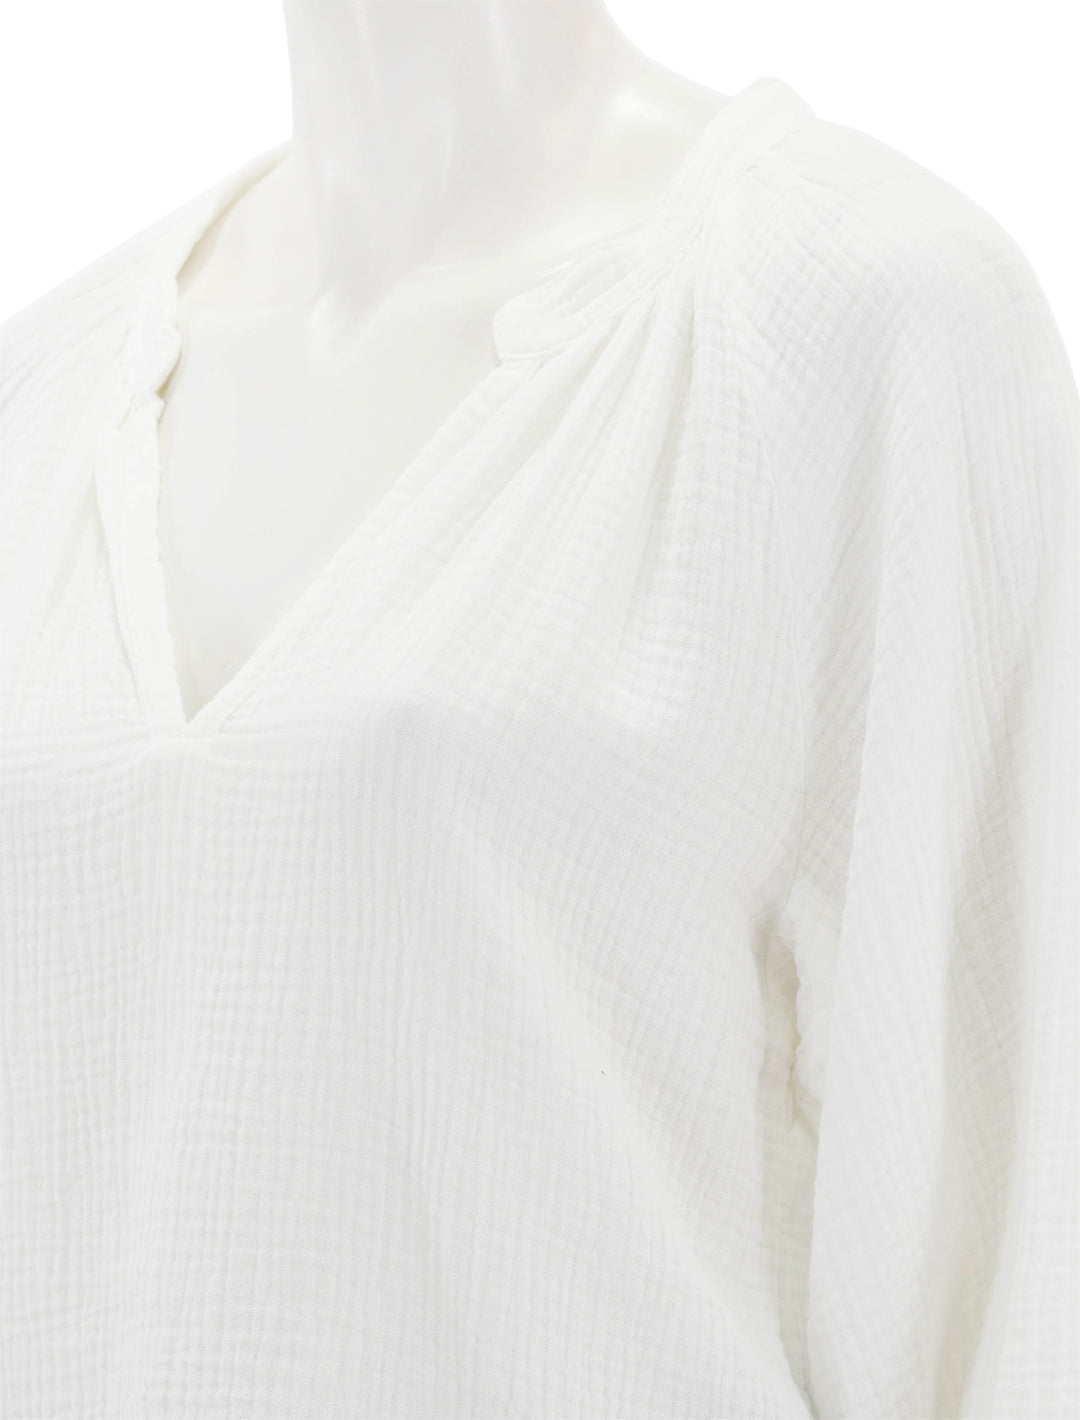 Close-up view of Nation LTD's mimi romance top in white.